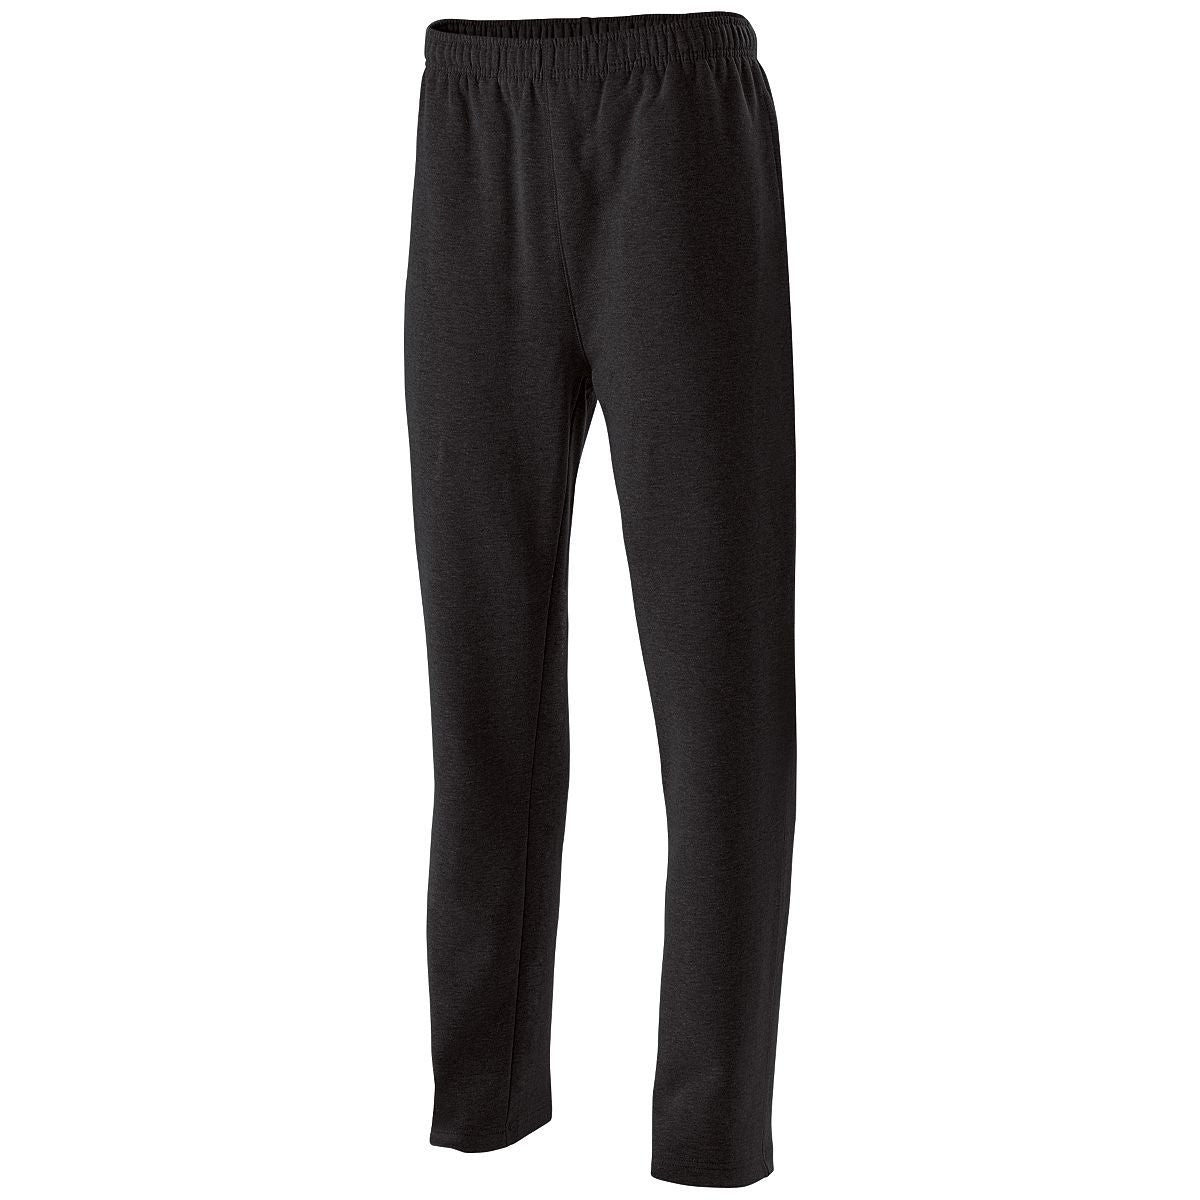 Holloway 60/40 Fleece Pant in Black  -Part of the Adult, Adult-Pants, Pants, Holloway product lines at KanaleyCreations.com